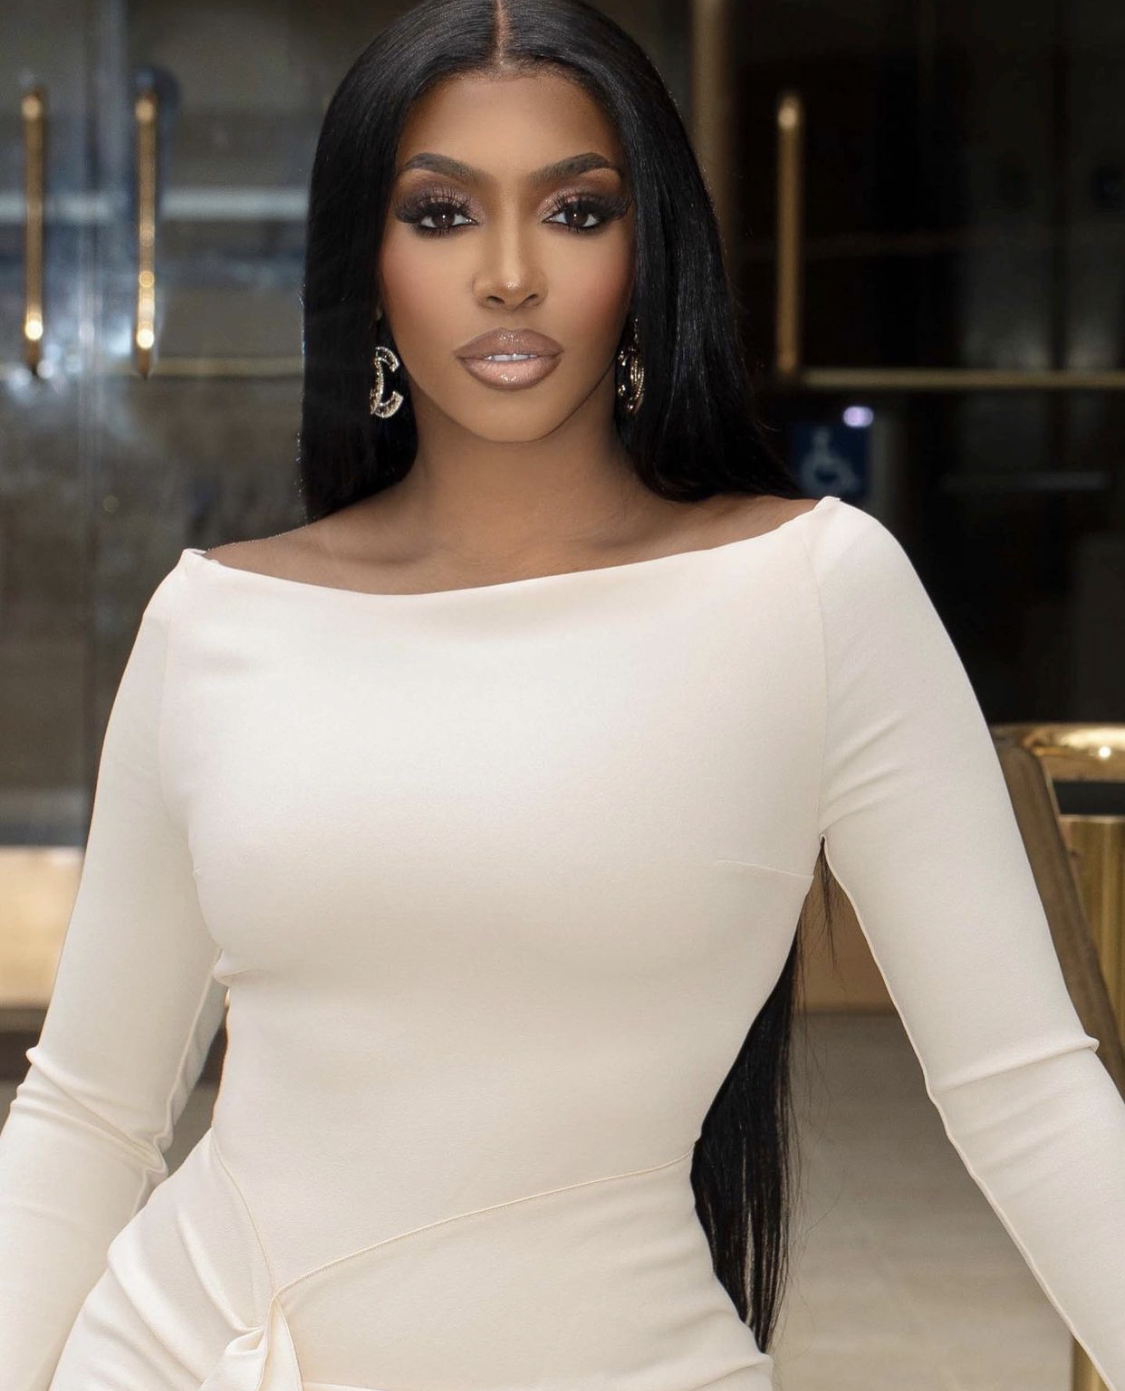 ‘You Need to Take Accountability for Your Part’: Porsha Williams Addresses Fight with Dennis During Family Trip with a Now-Deleted Post and Fans Bash the Star